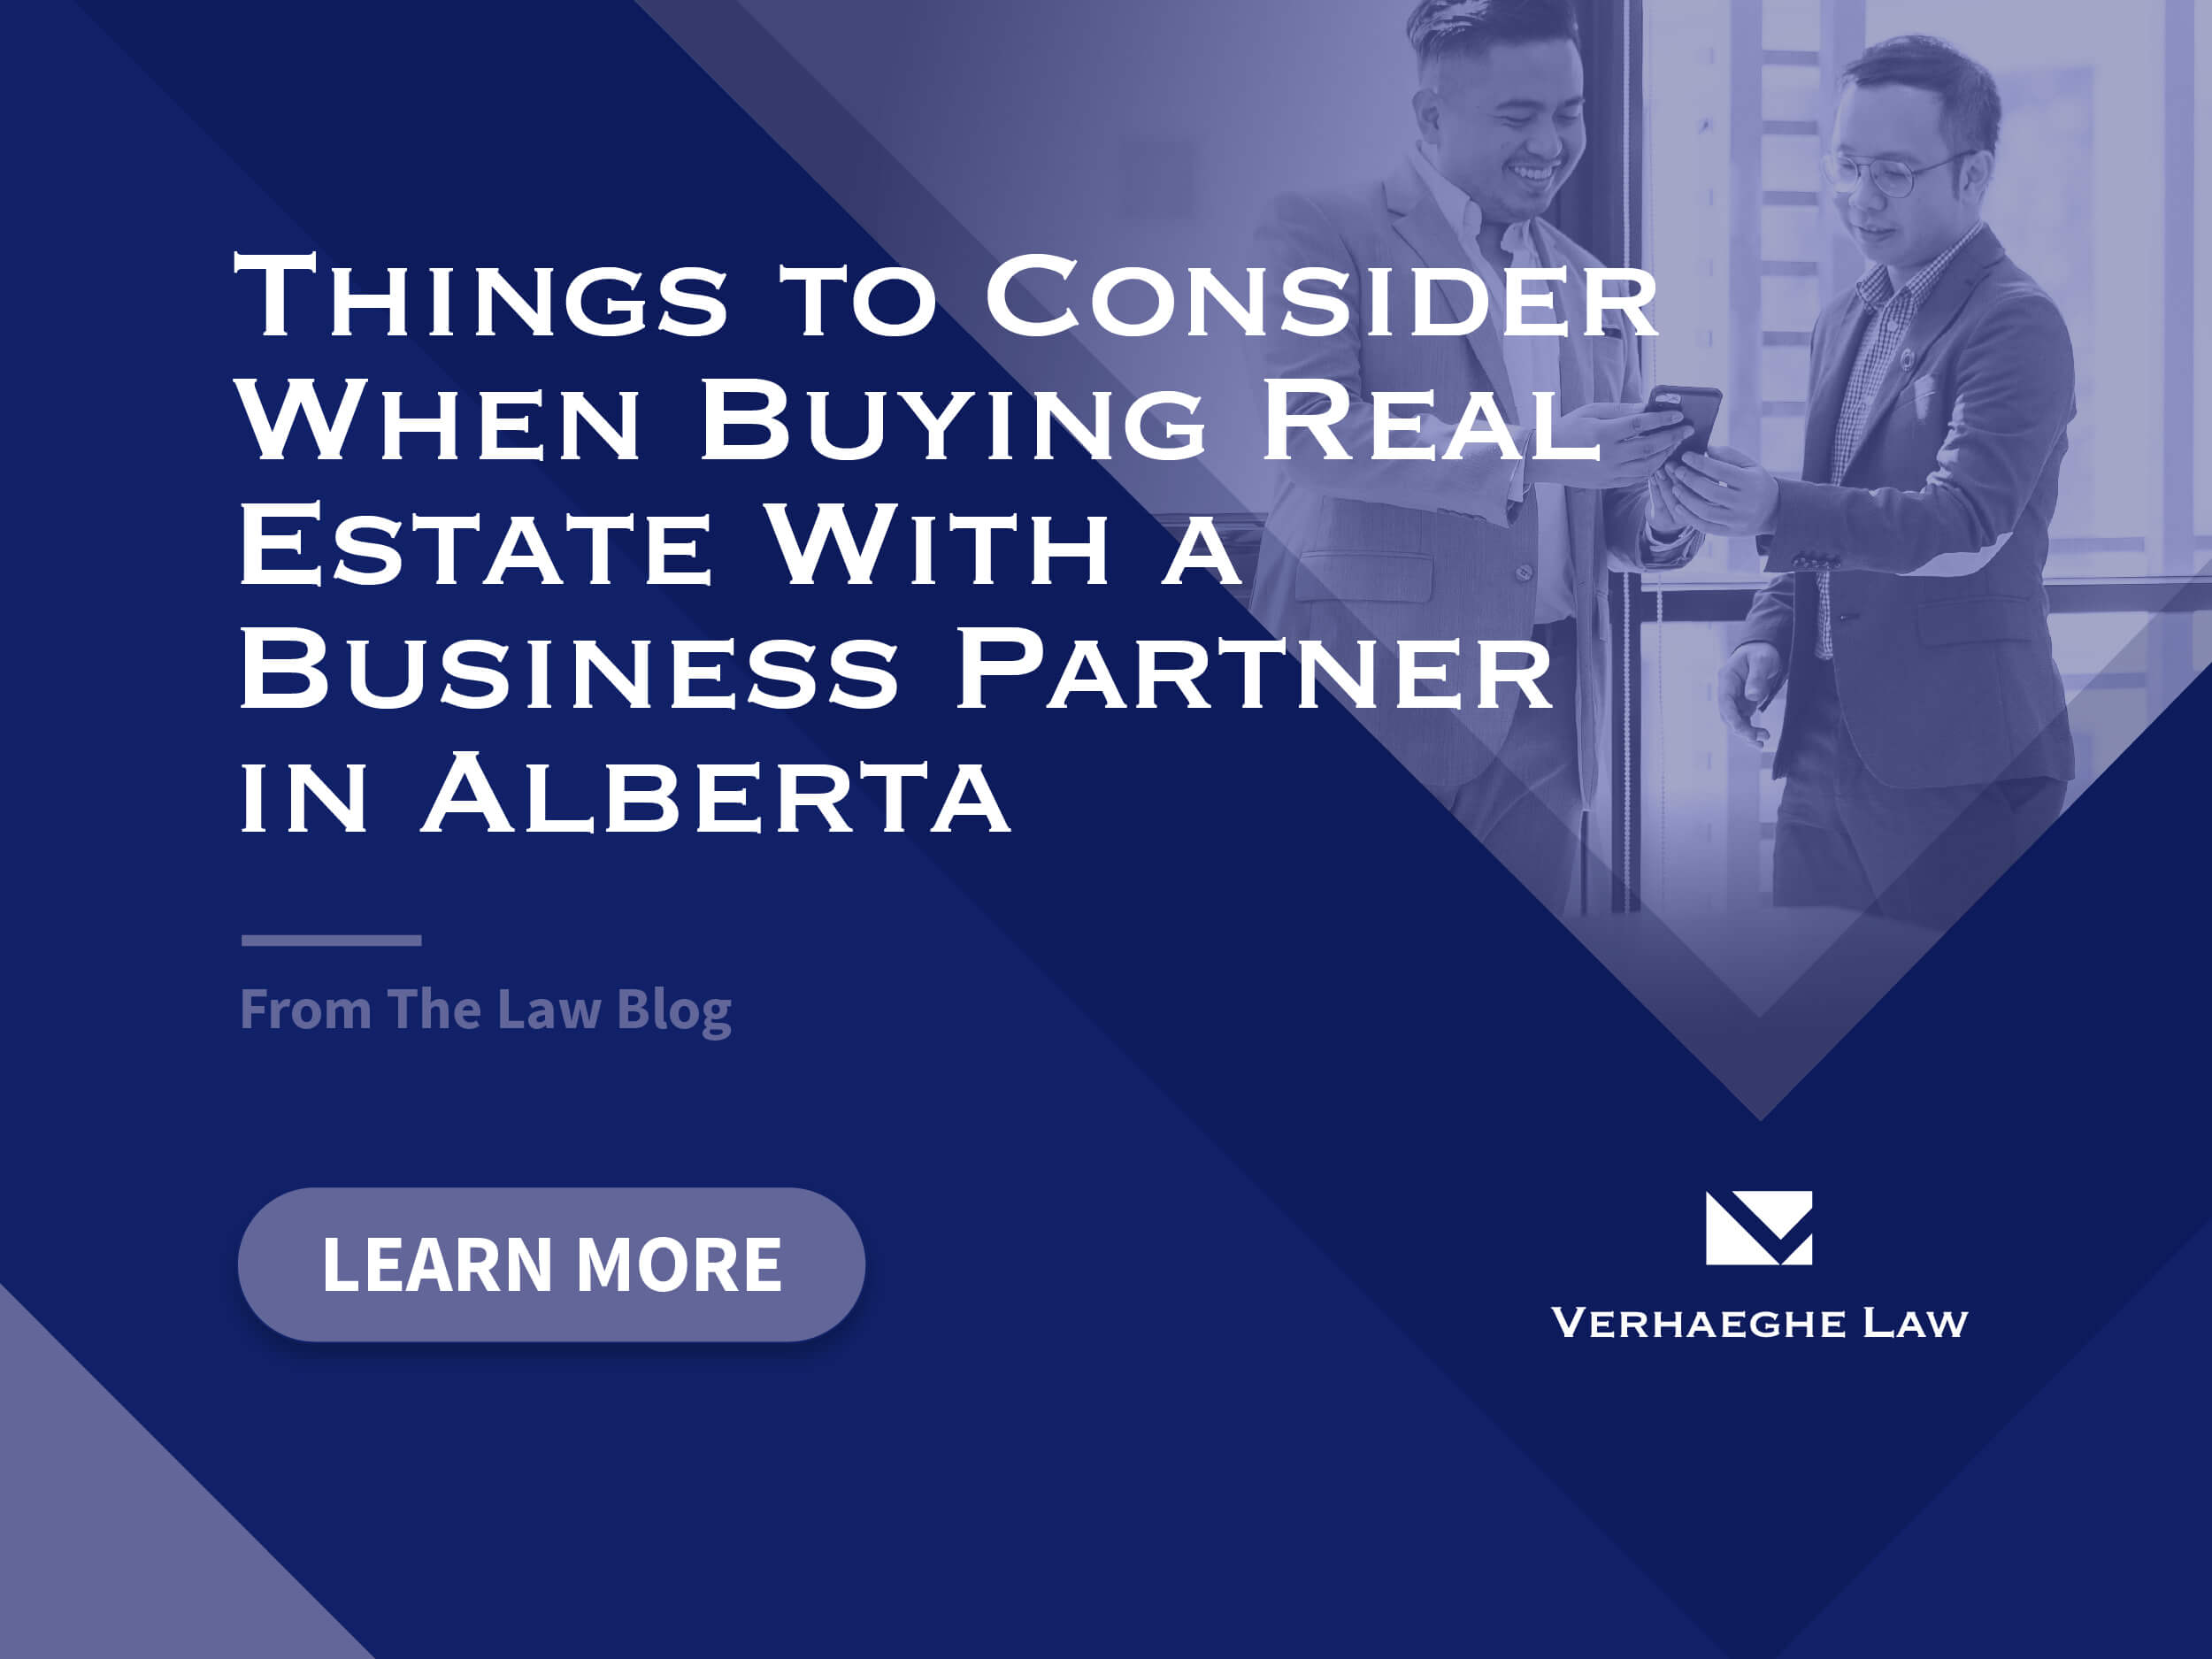 Things to Consider When Buying Real Estate with a Business Partner in Alberta